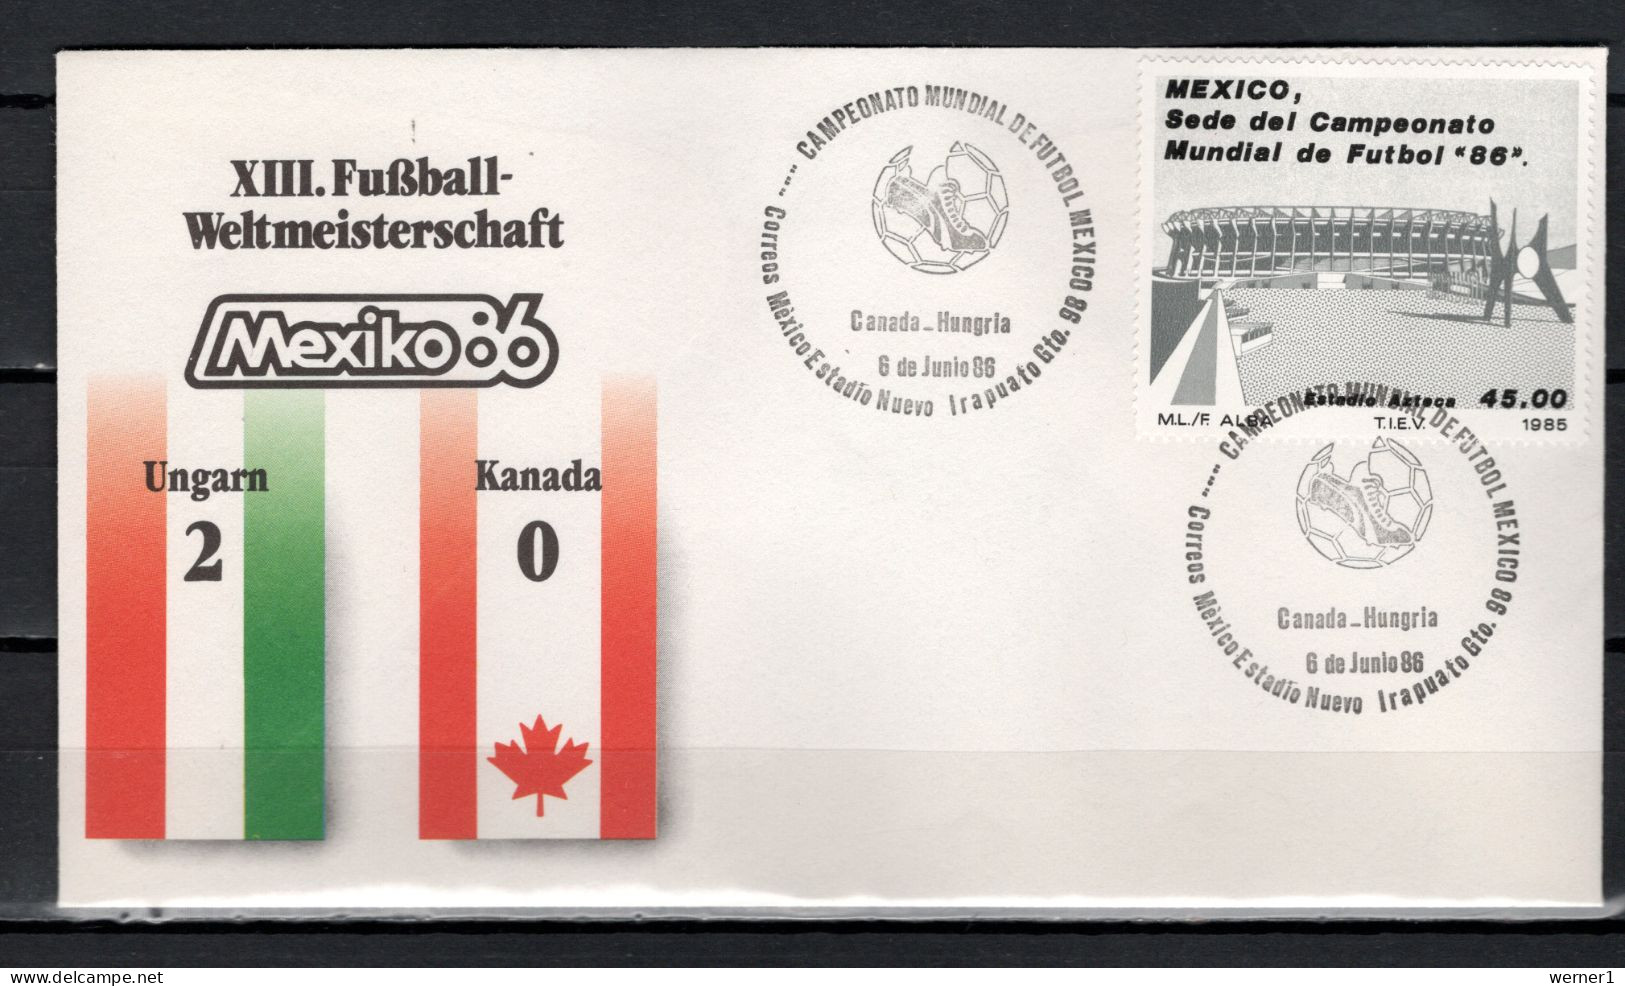 Mexico 1986 Football Soccer World Cup Commemorative Cover Match Hungary - Canada 2 : 0 - 1986 – Mexique